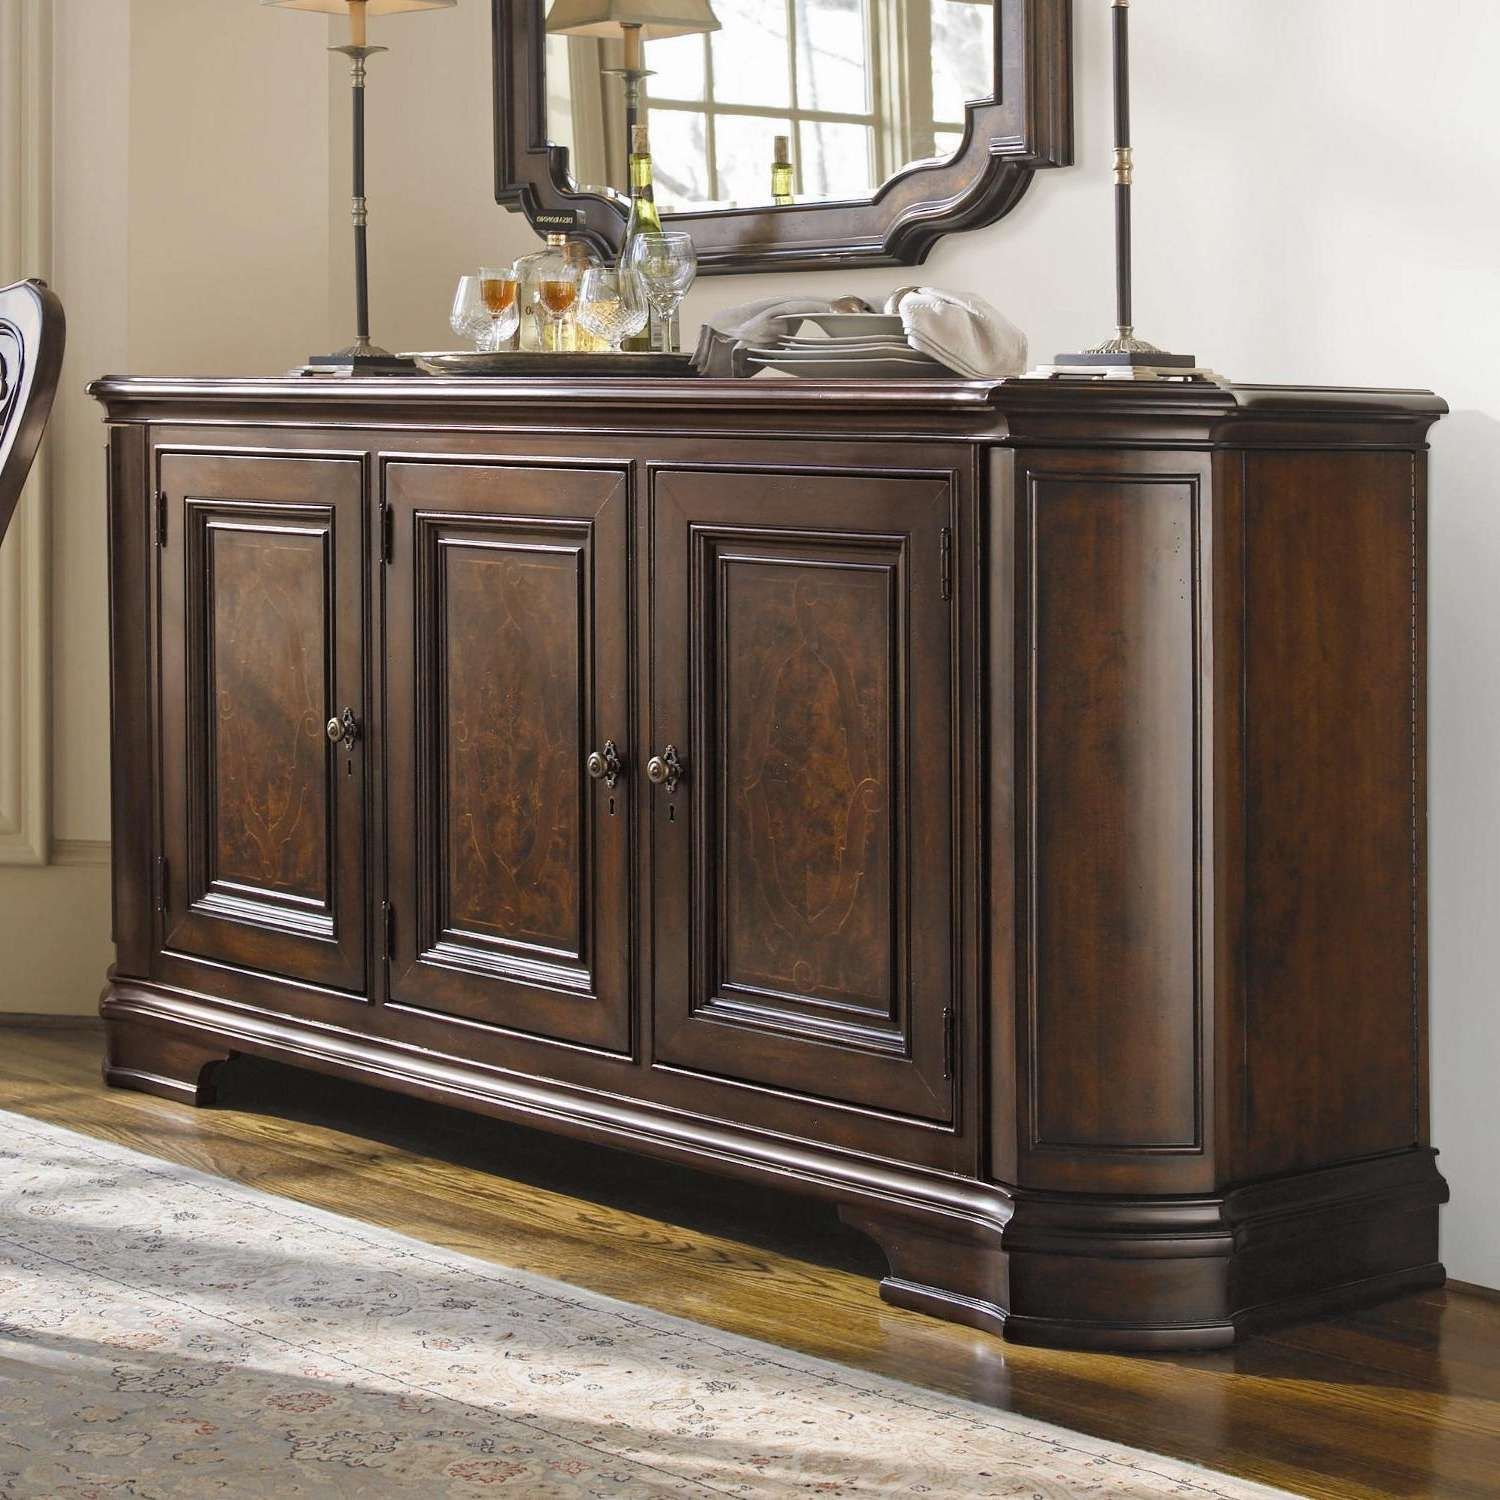 Inspirational Dining Room Sideboards And Buffets – Bjdgjy For Dining Room Sideboards And Buffets (View 1 of 20)